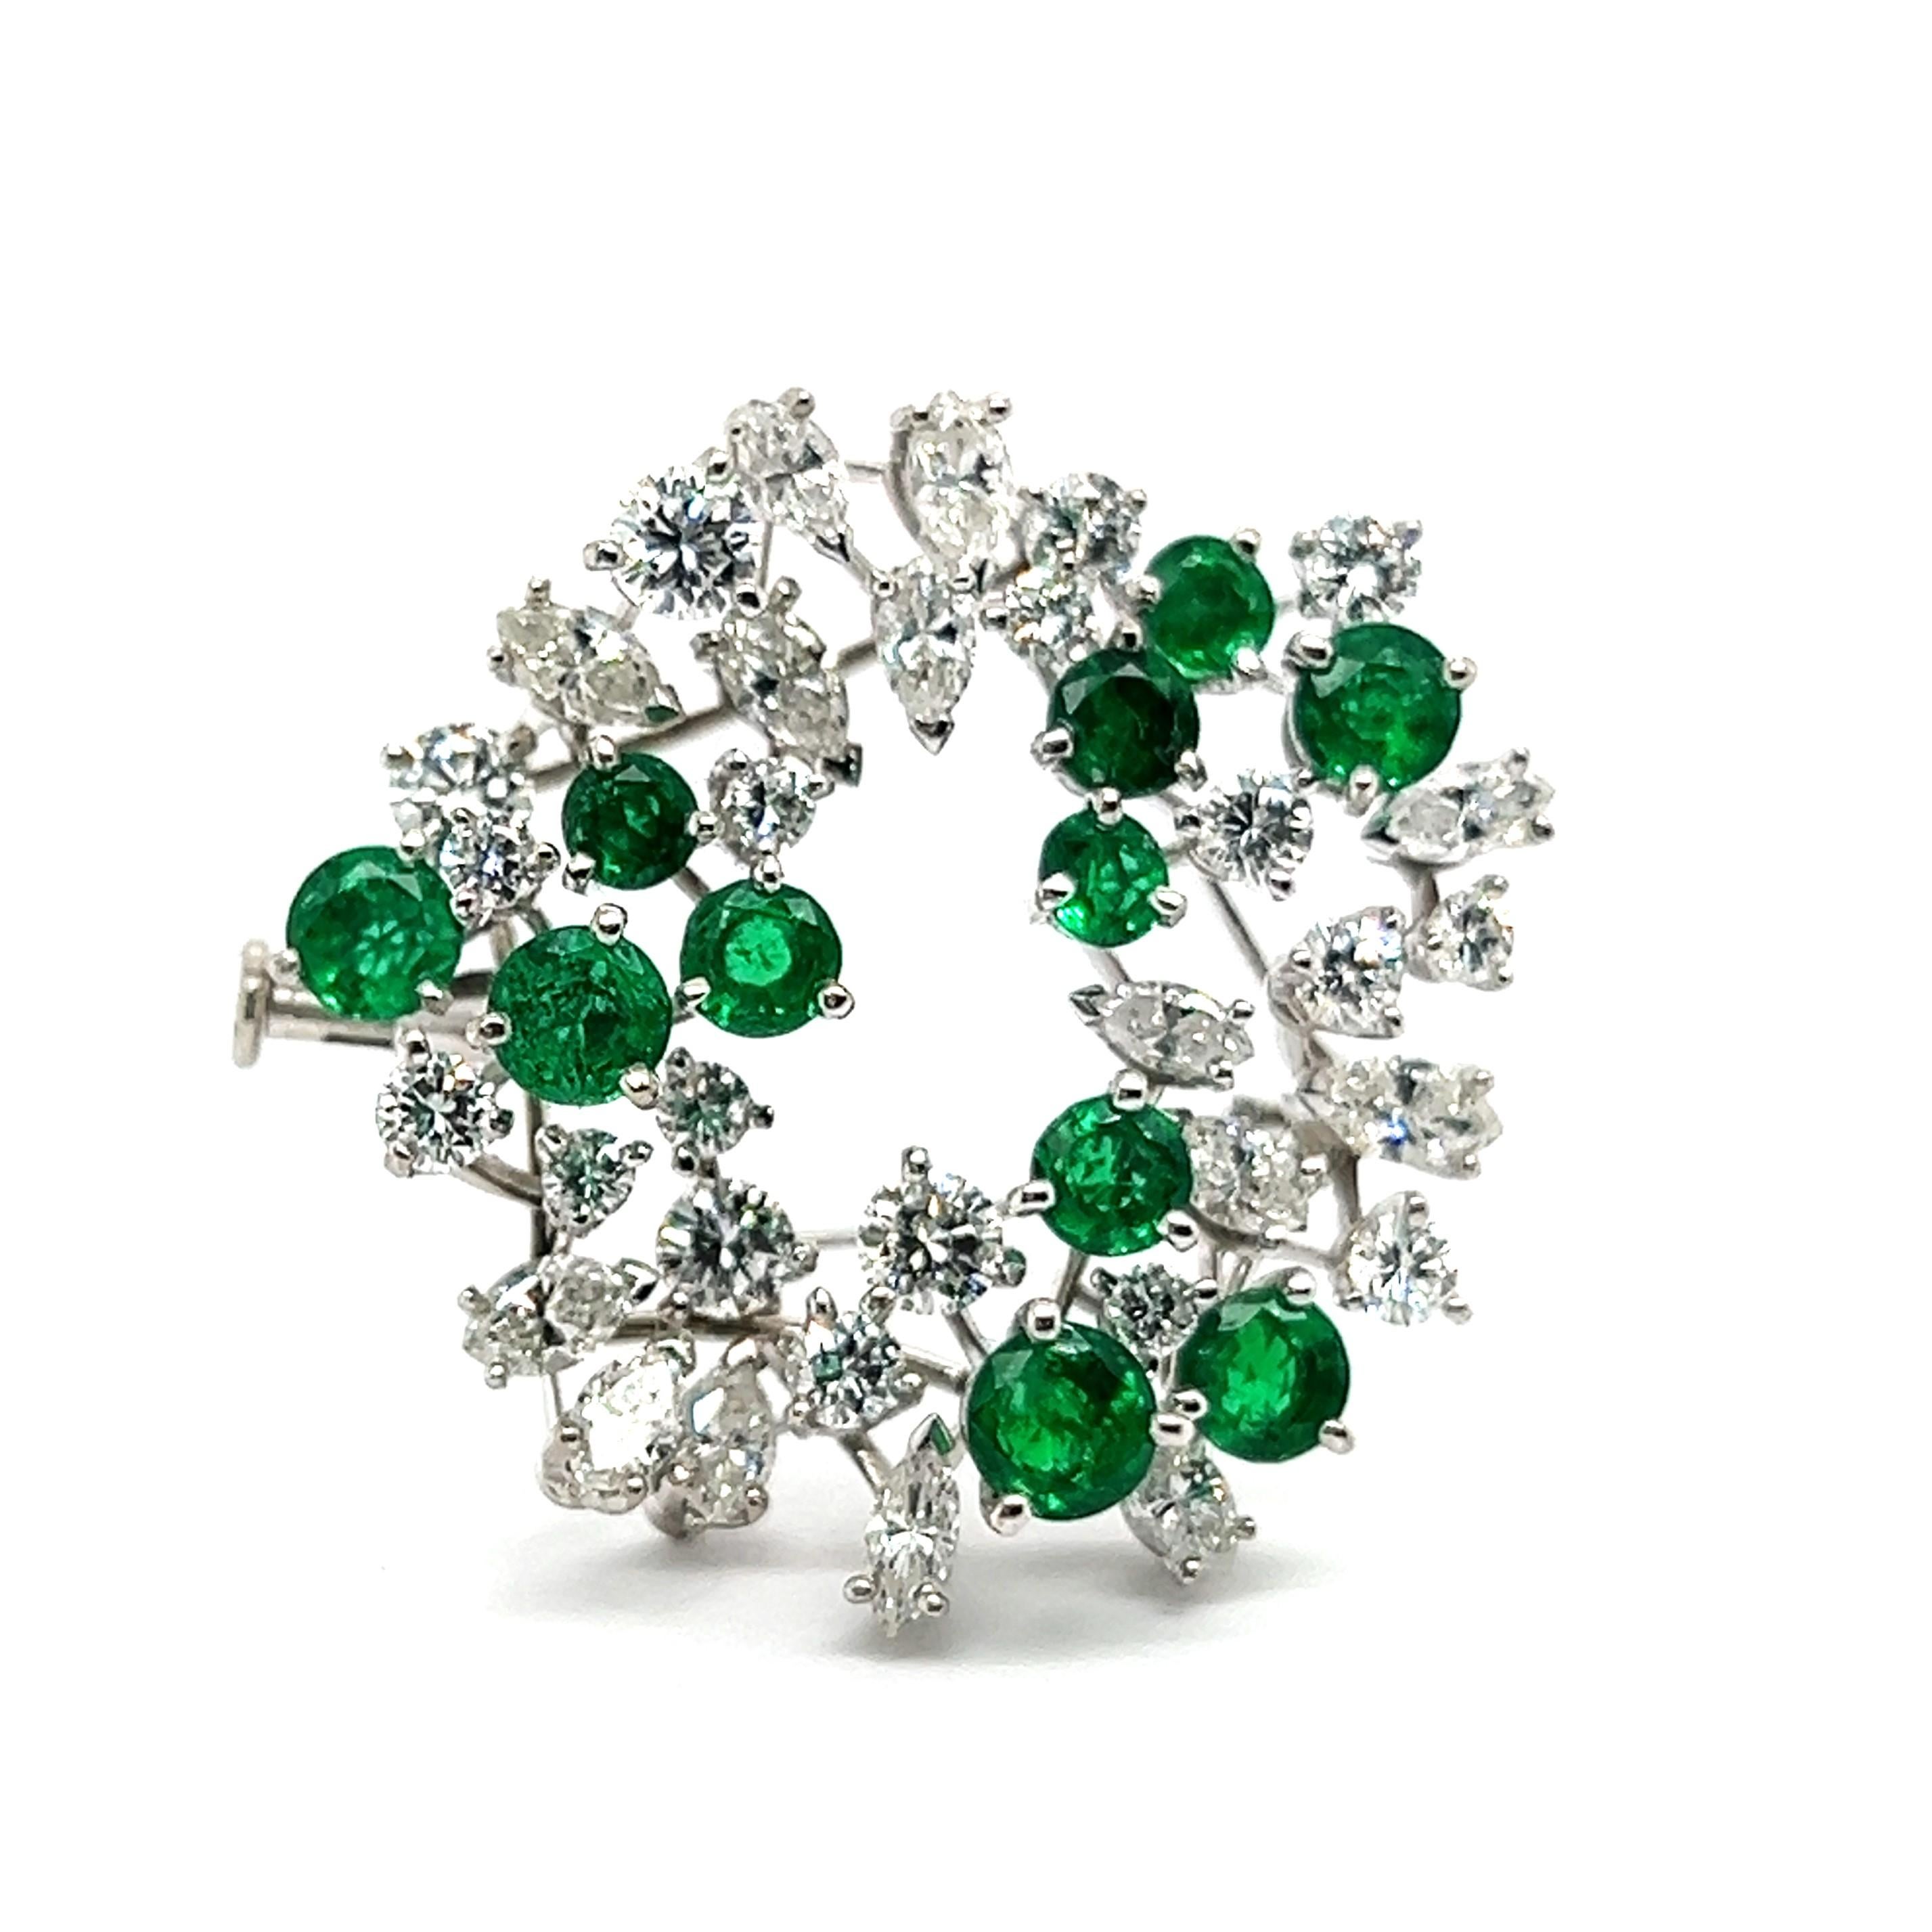 Brooch with Emeralds & Diamonds in 18 Karat White Gold by Meister For Sale 7